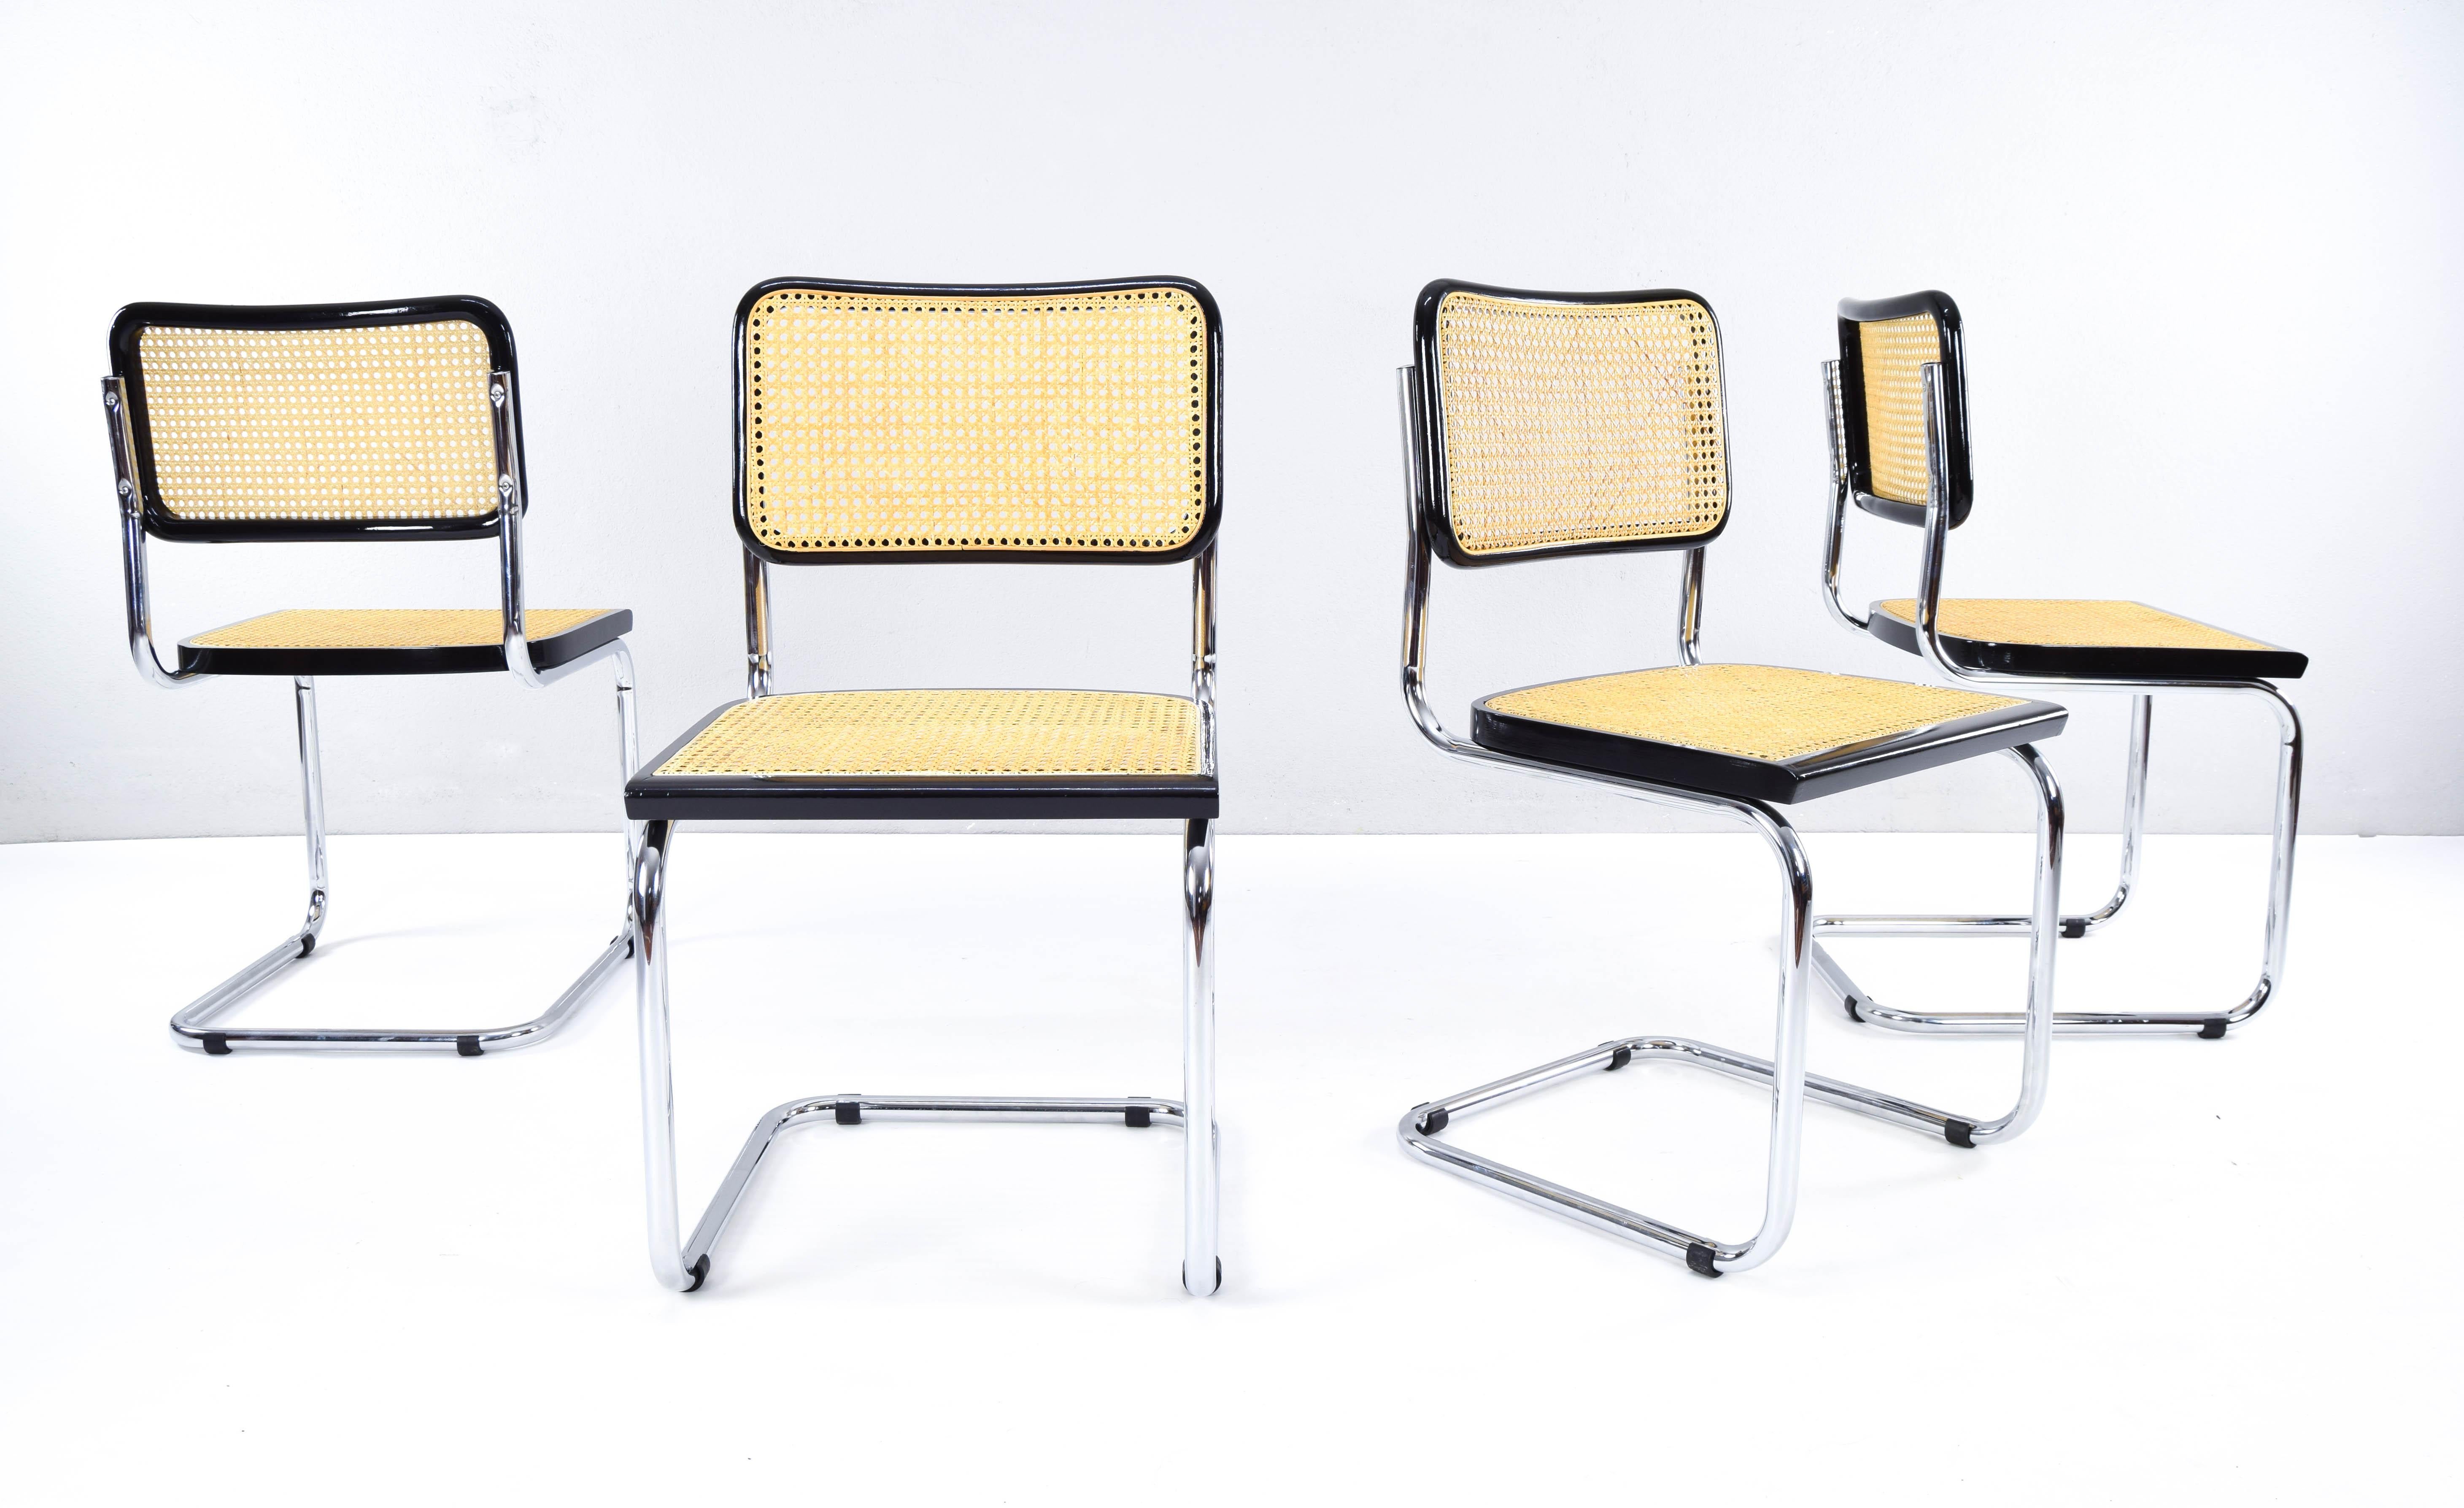 Set of four Cesca B32 chairs, Italy, 1970s.
Chromed tubular chassis in good general condition.
Seat and back structures in black lacquered beech wood and natural Viennese grille.

Measurements:
Overall height 85cm
High seat 45.5 cm
width